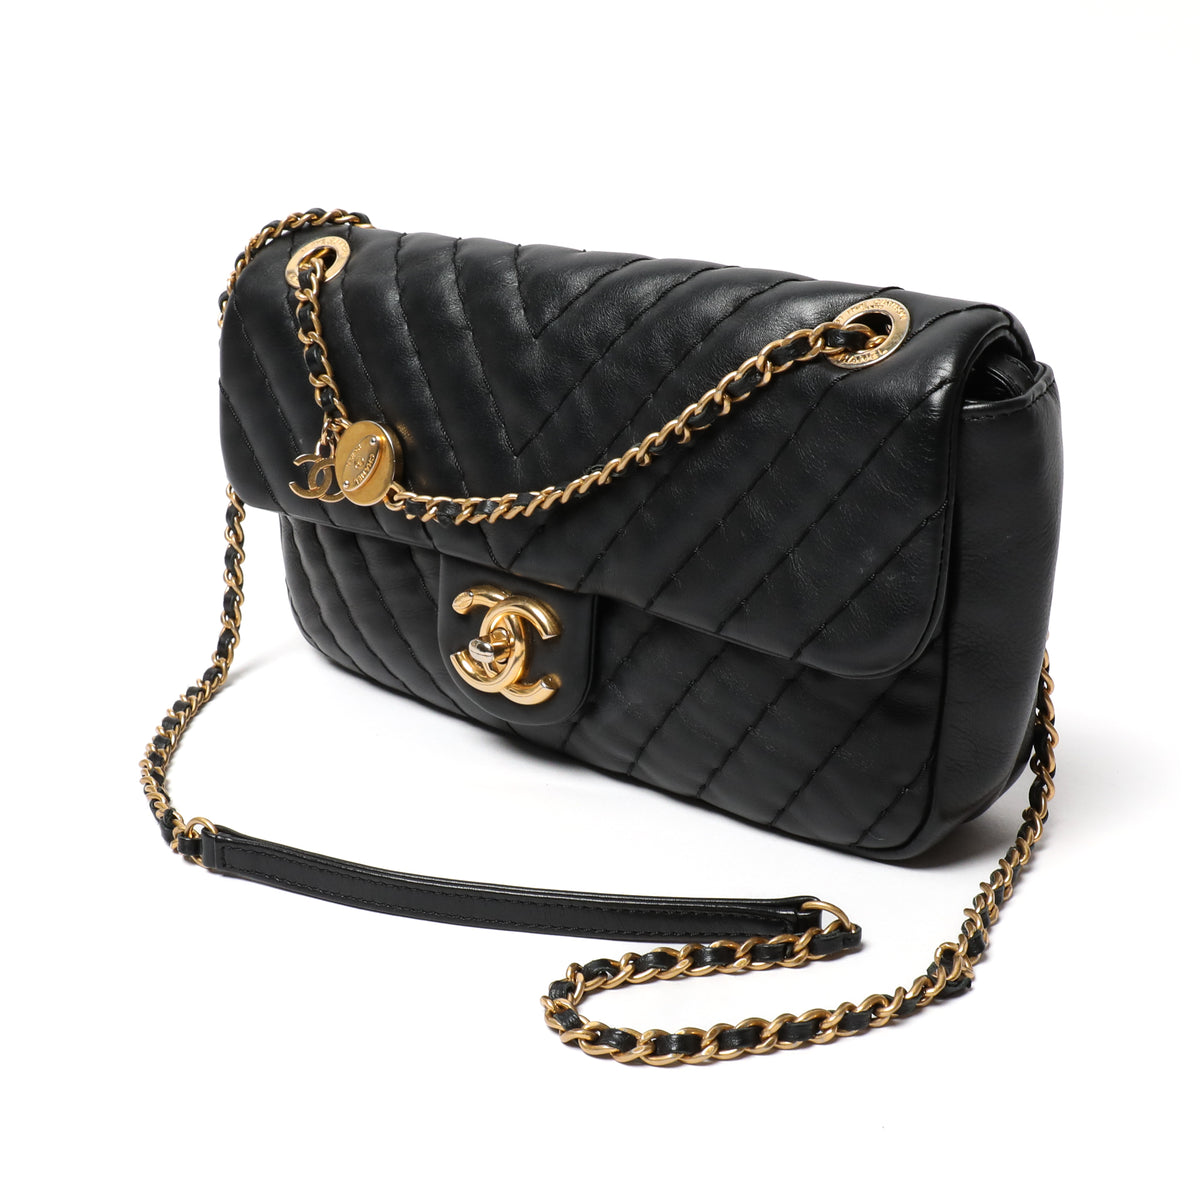 CHANEL Black V Stitch Double Flap Crossbody bag with Gold